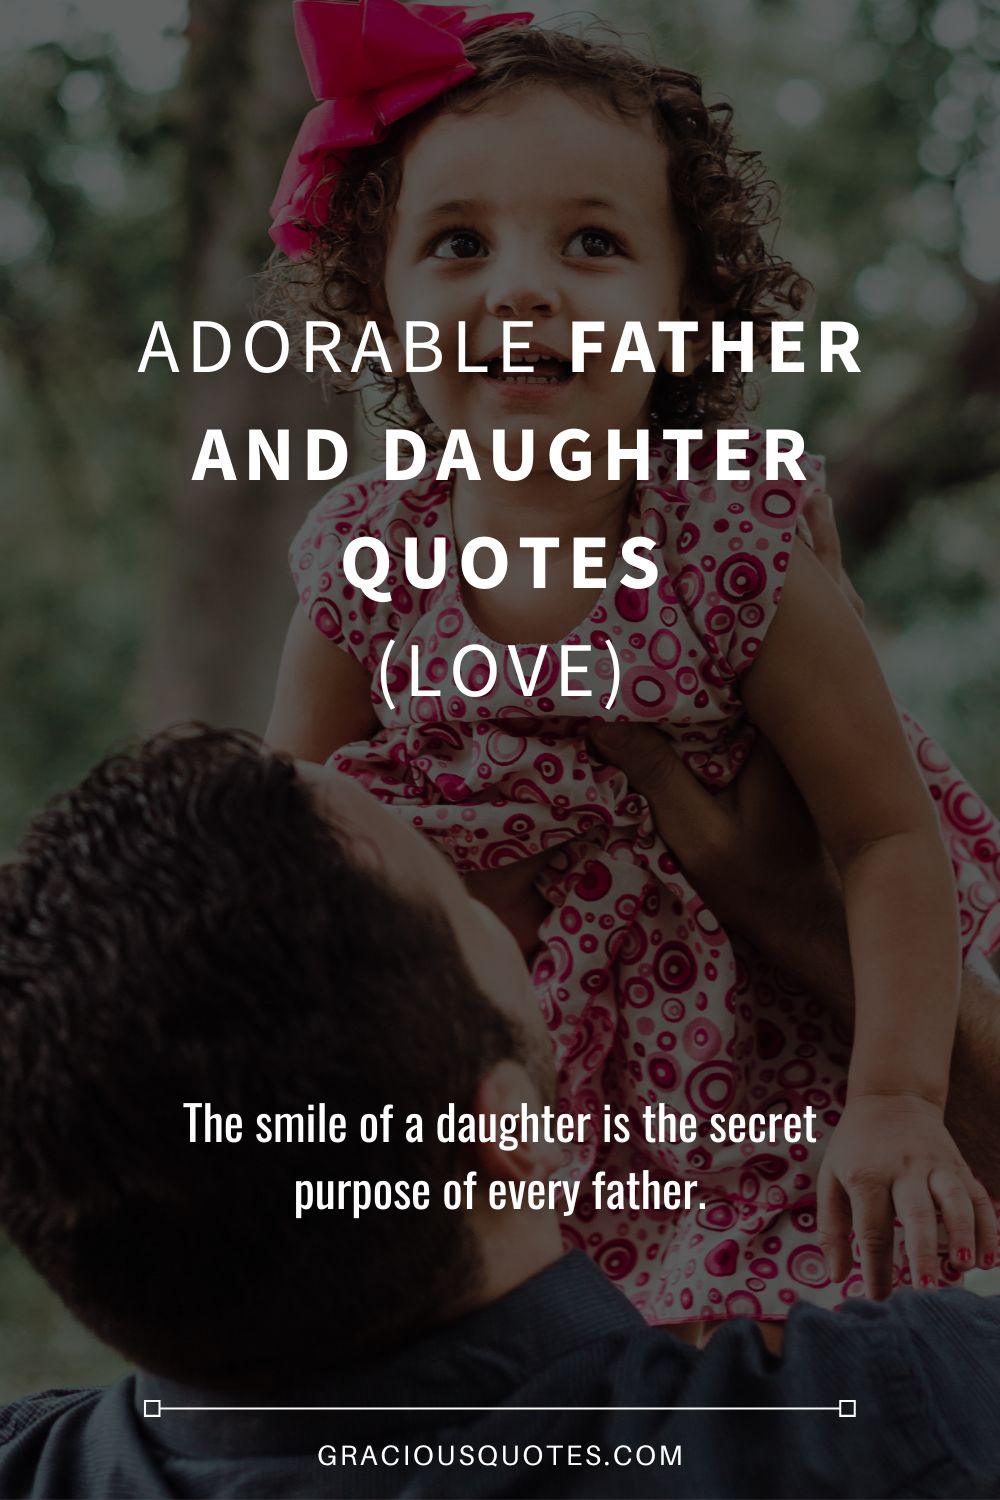 Adorable Father and Daughter Quotes (LOVE) - Gracious Quotes